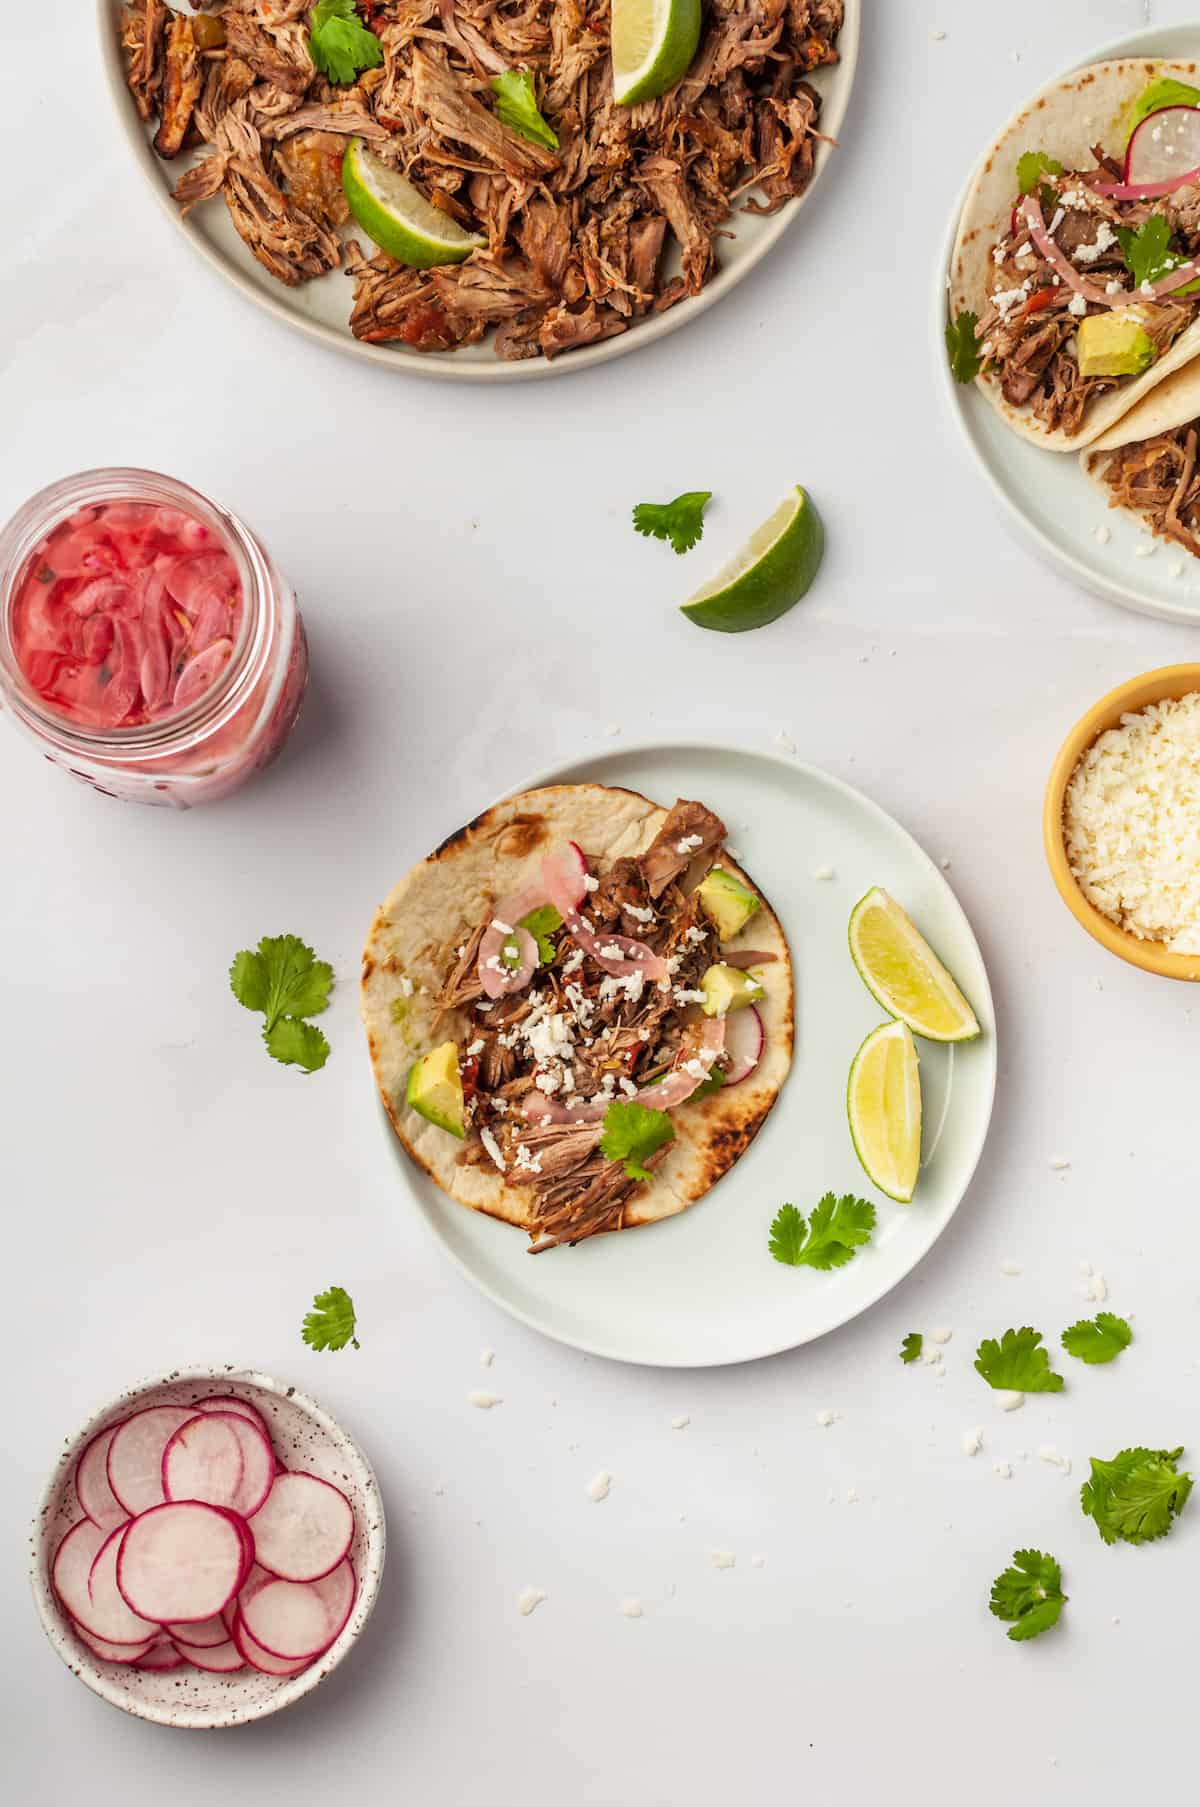 Pork carnitas taco on plate surrounded by bowls of toppings